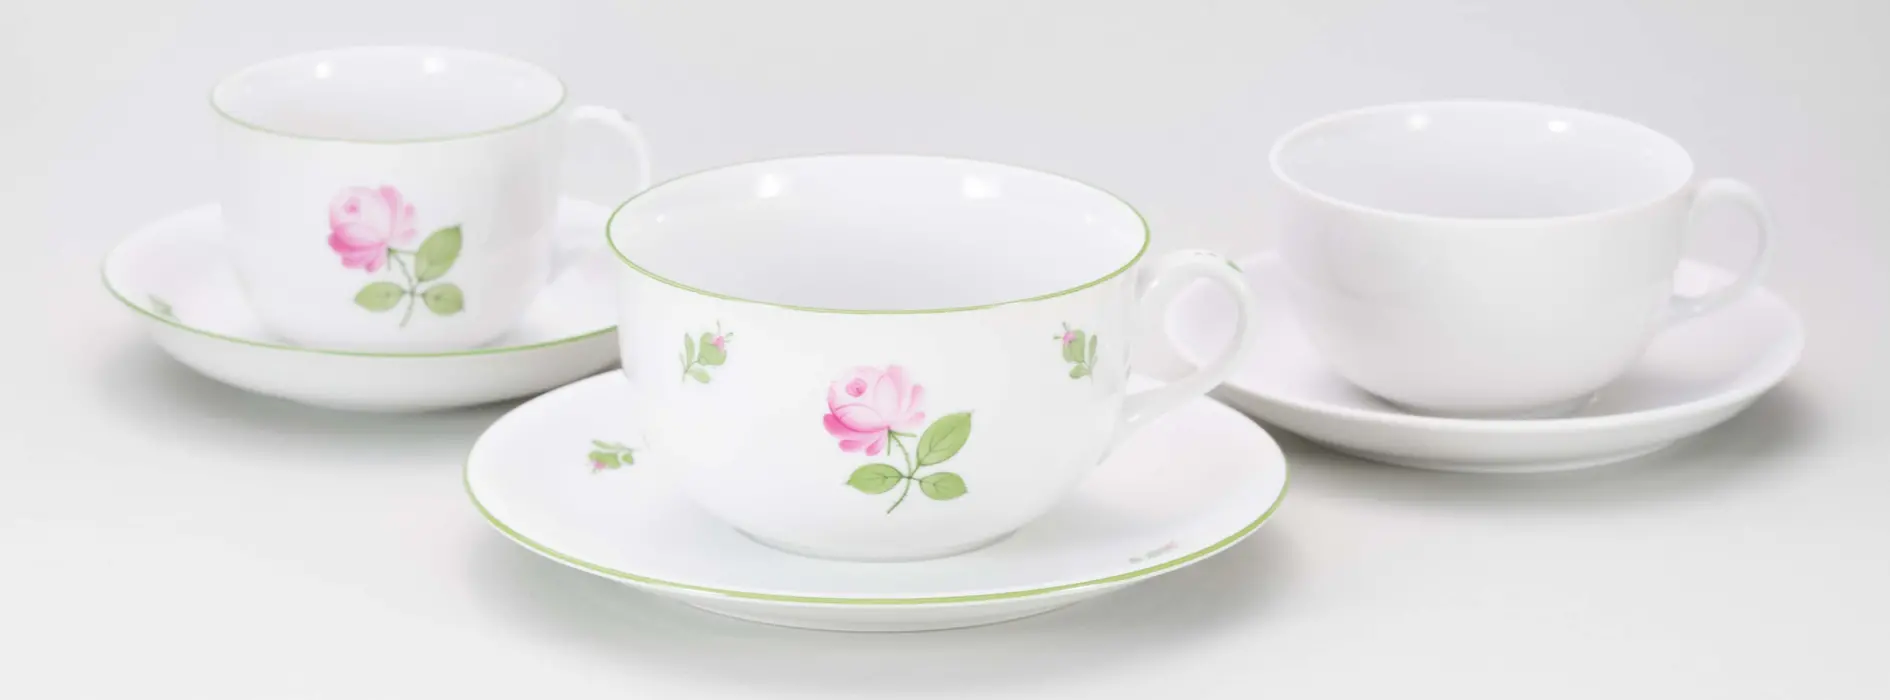 Augarten porcelain with decoration of the Viennese Rose